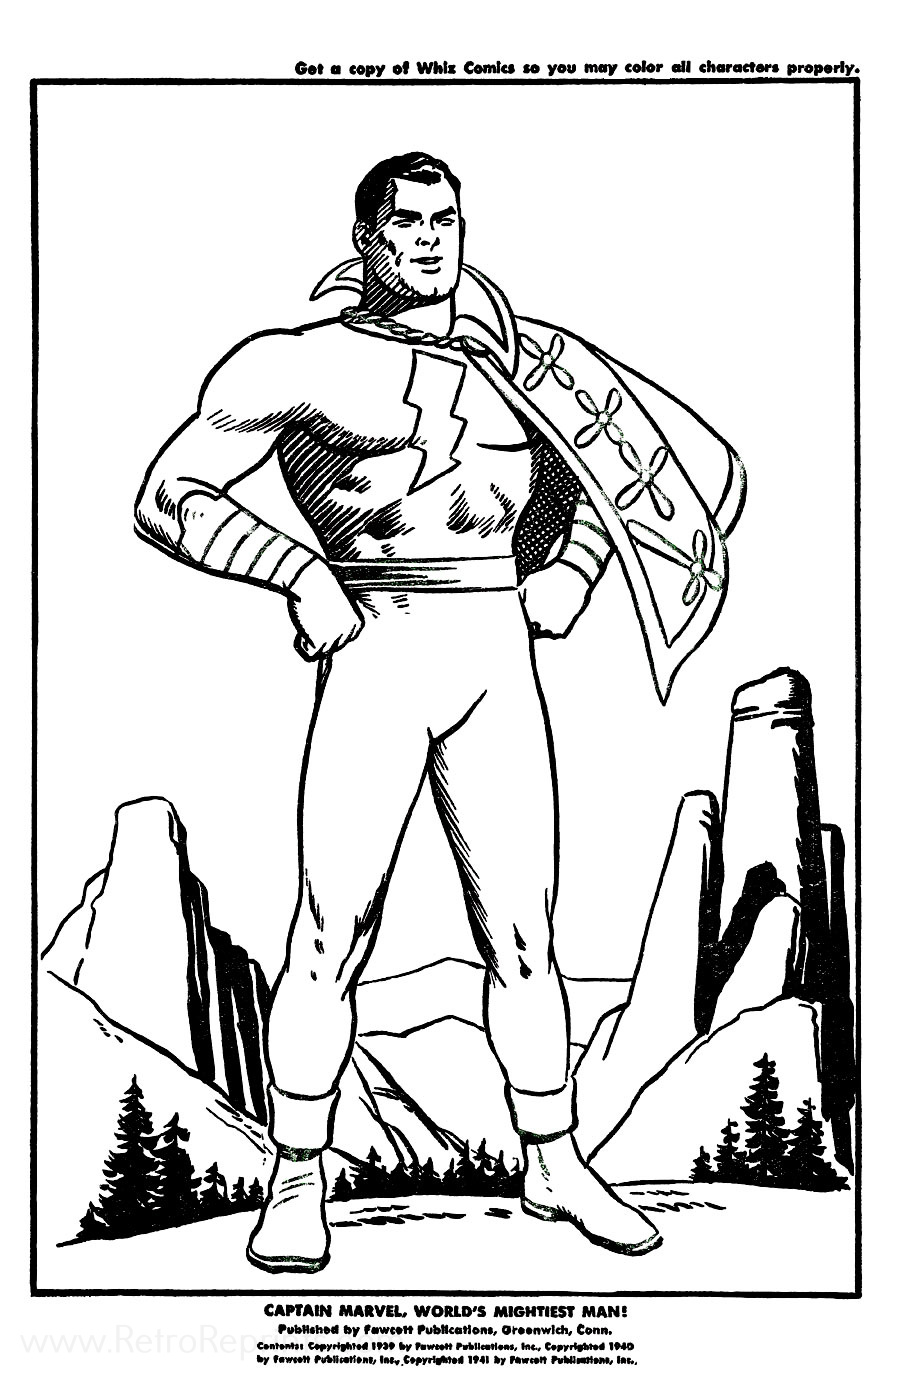 Shaza captain arvel coloring pages coloring books at retro reprints